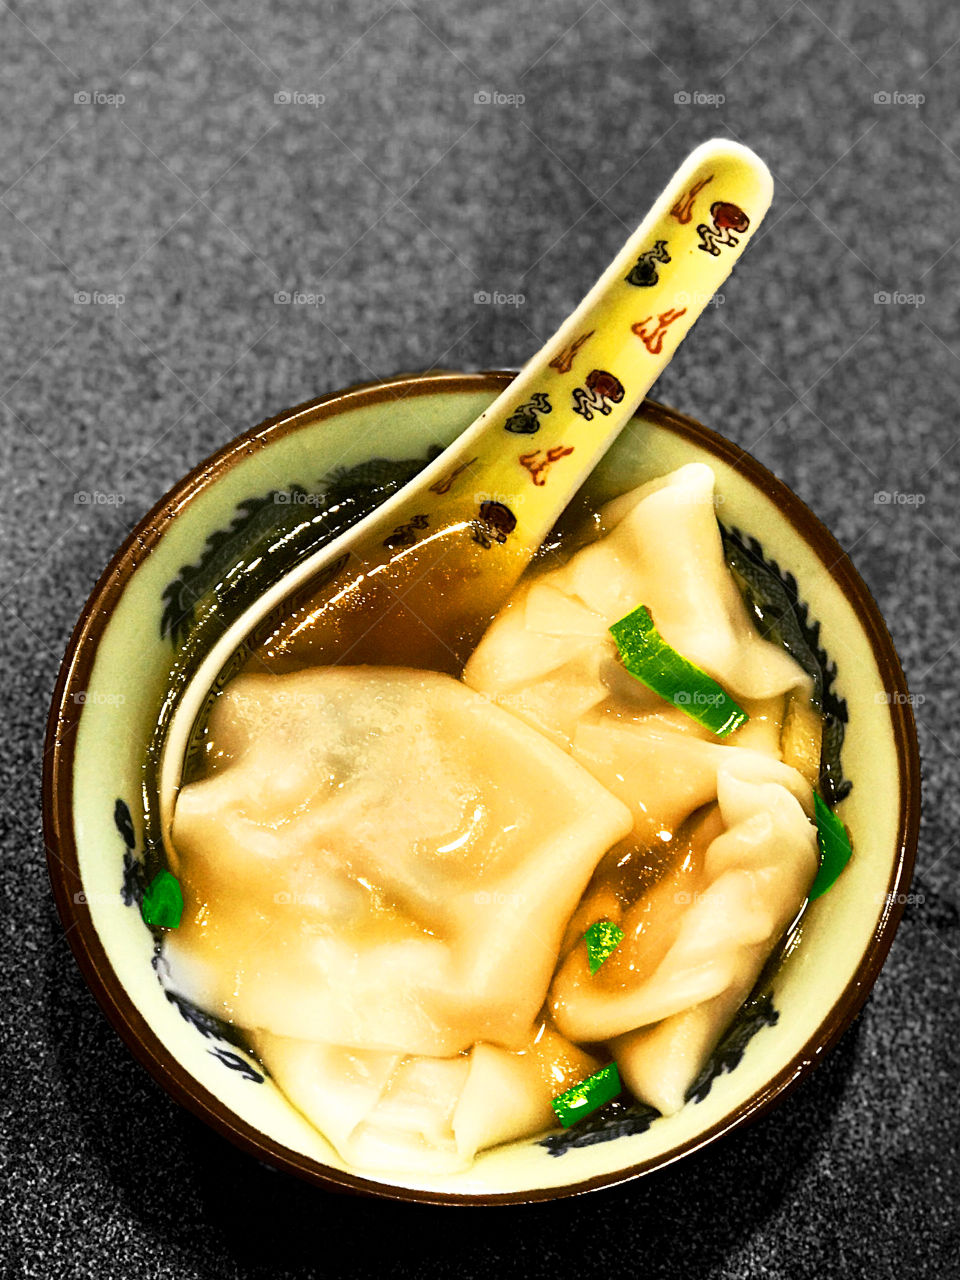 Delicious homemade wonton soup made by my daughter. She learned how to make it in her Global Foods course and made some for her family at home! So good! Yummm! 🍲